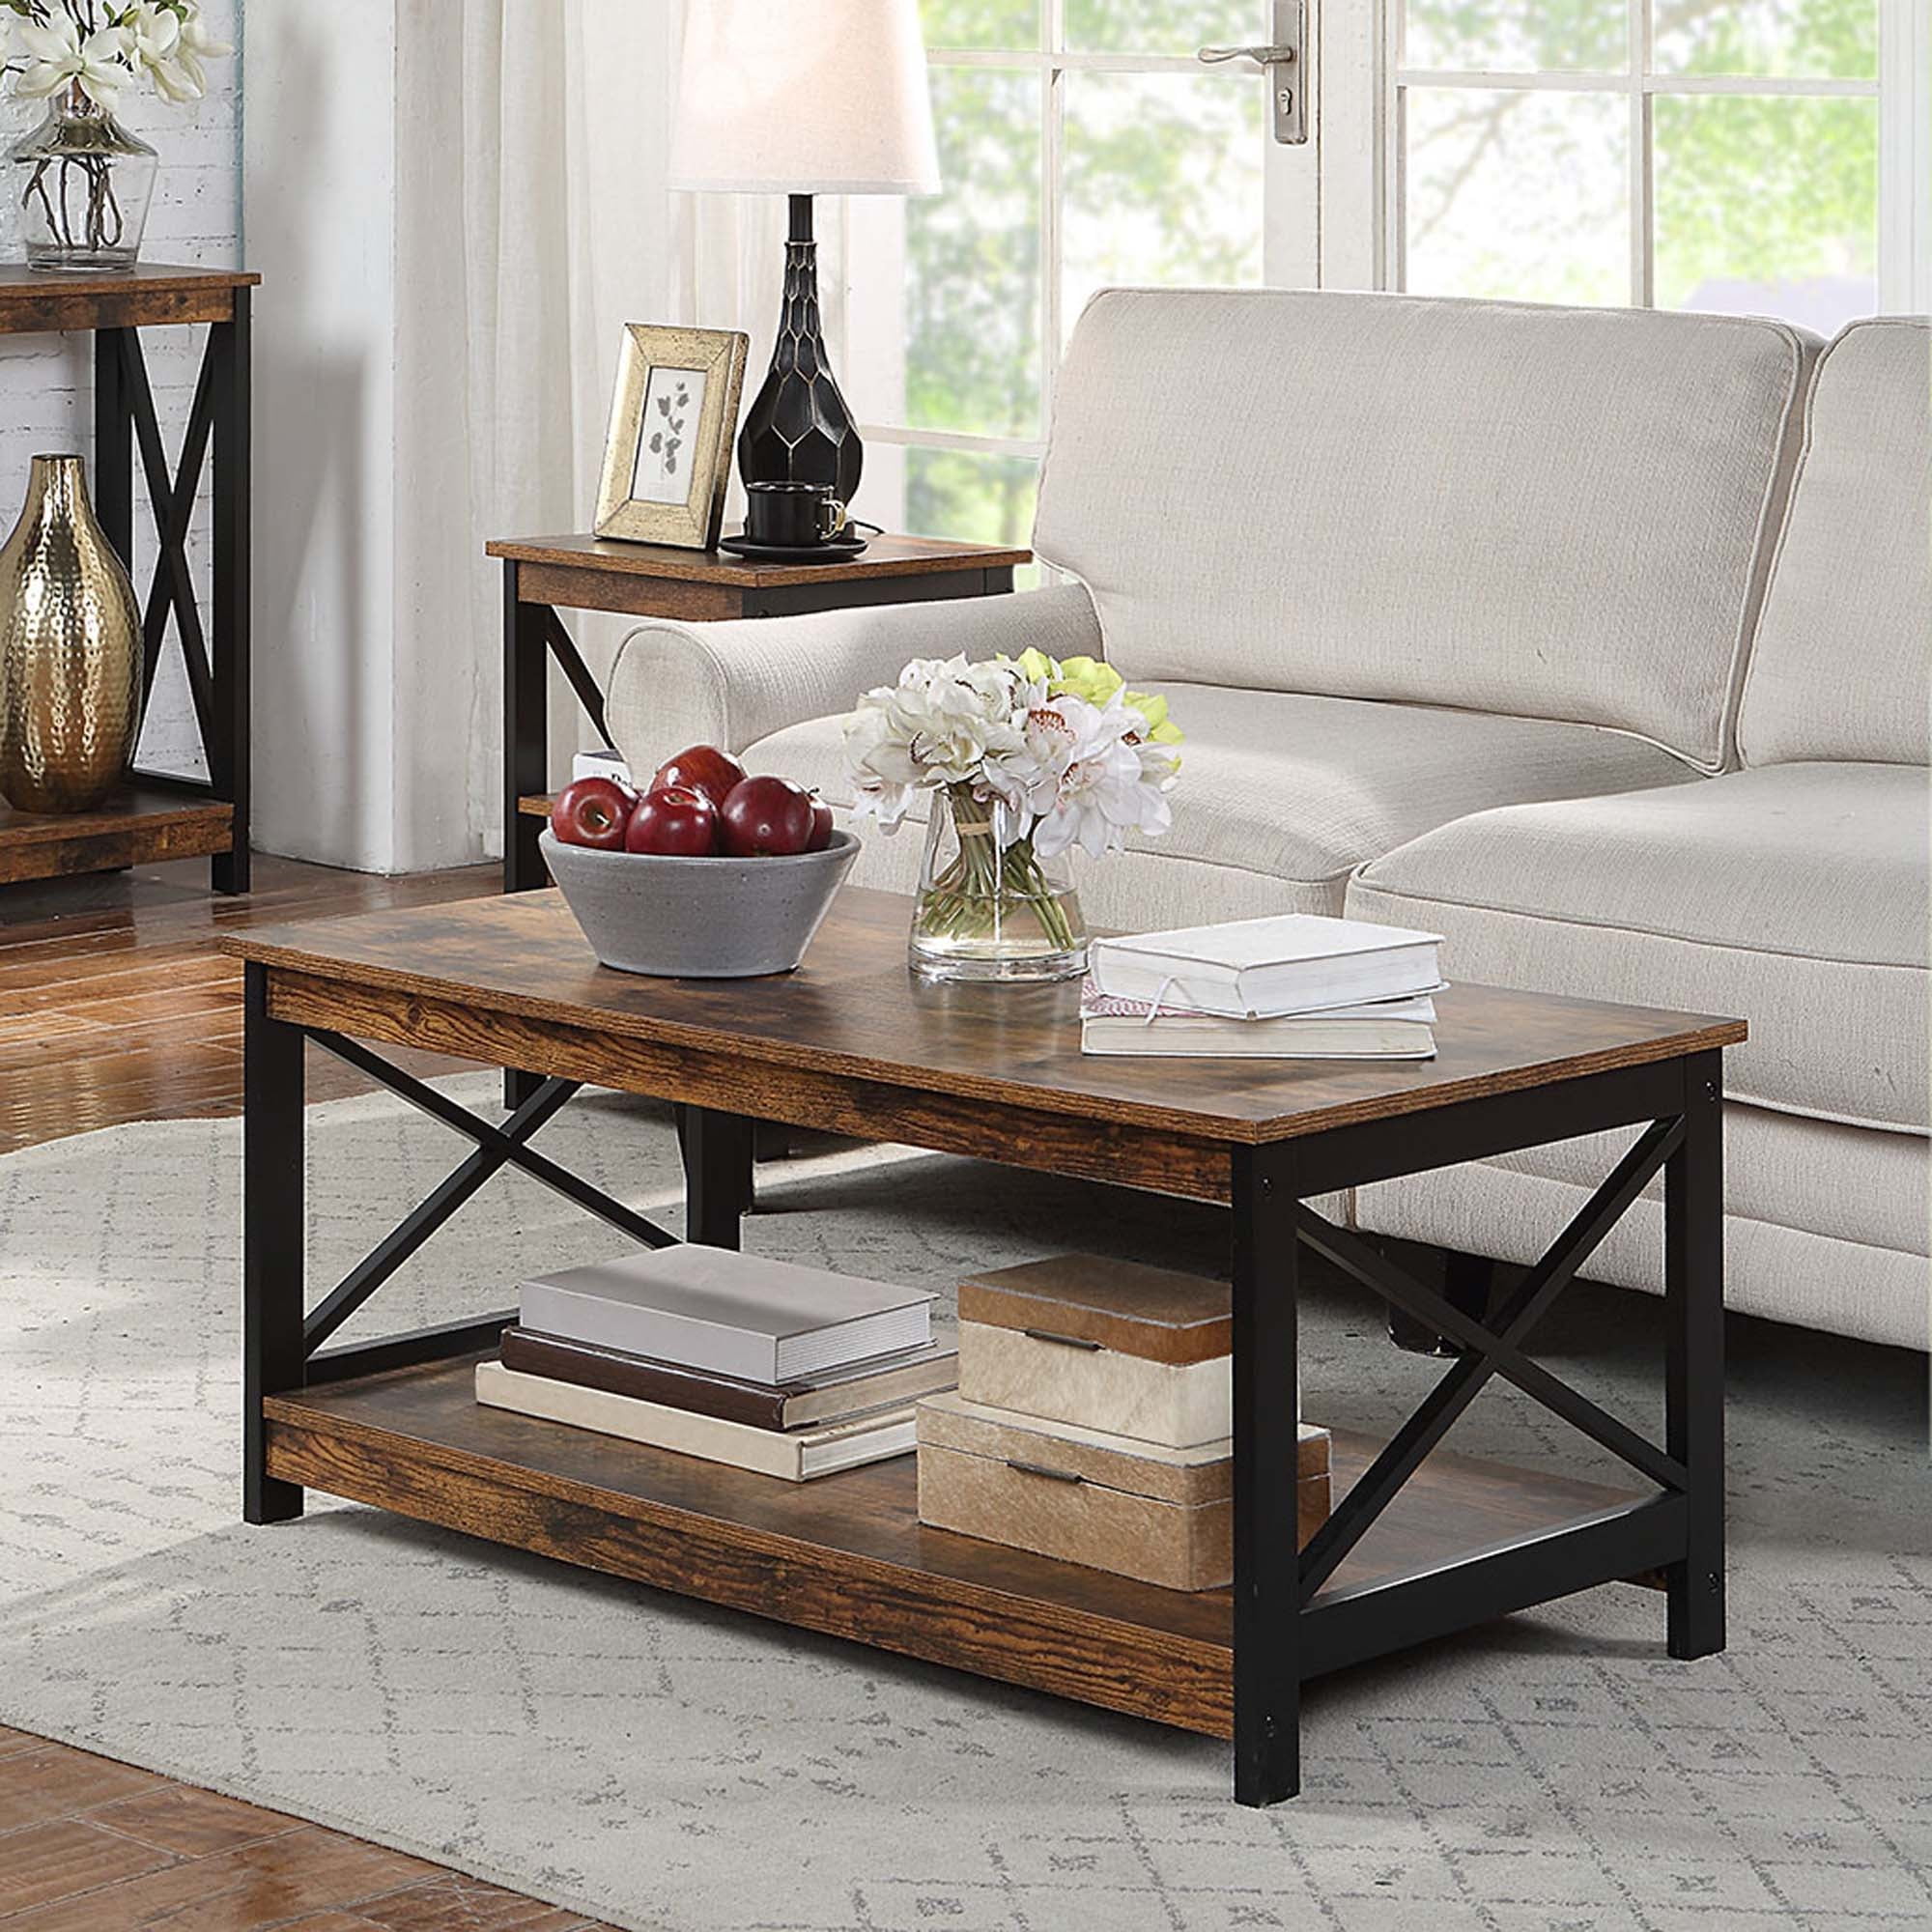 Convenience Concepts Oxford Coffee Table with Shelf, Barnwood/Black ...